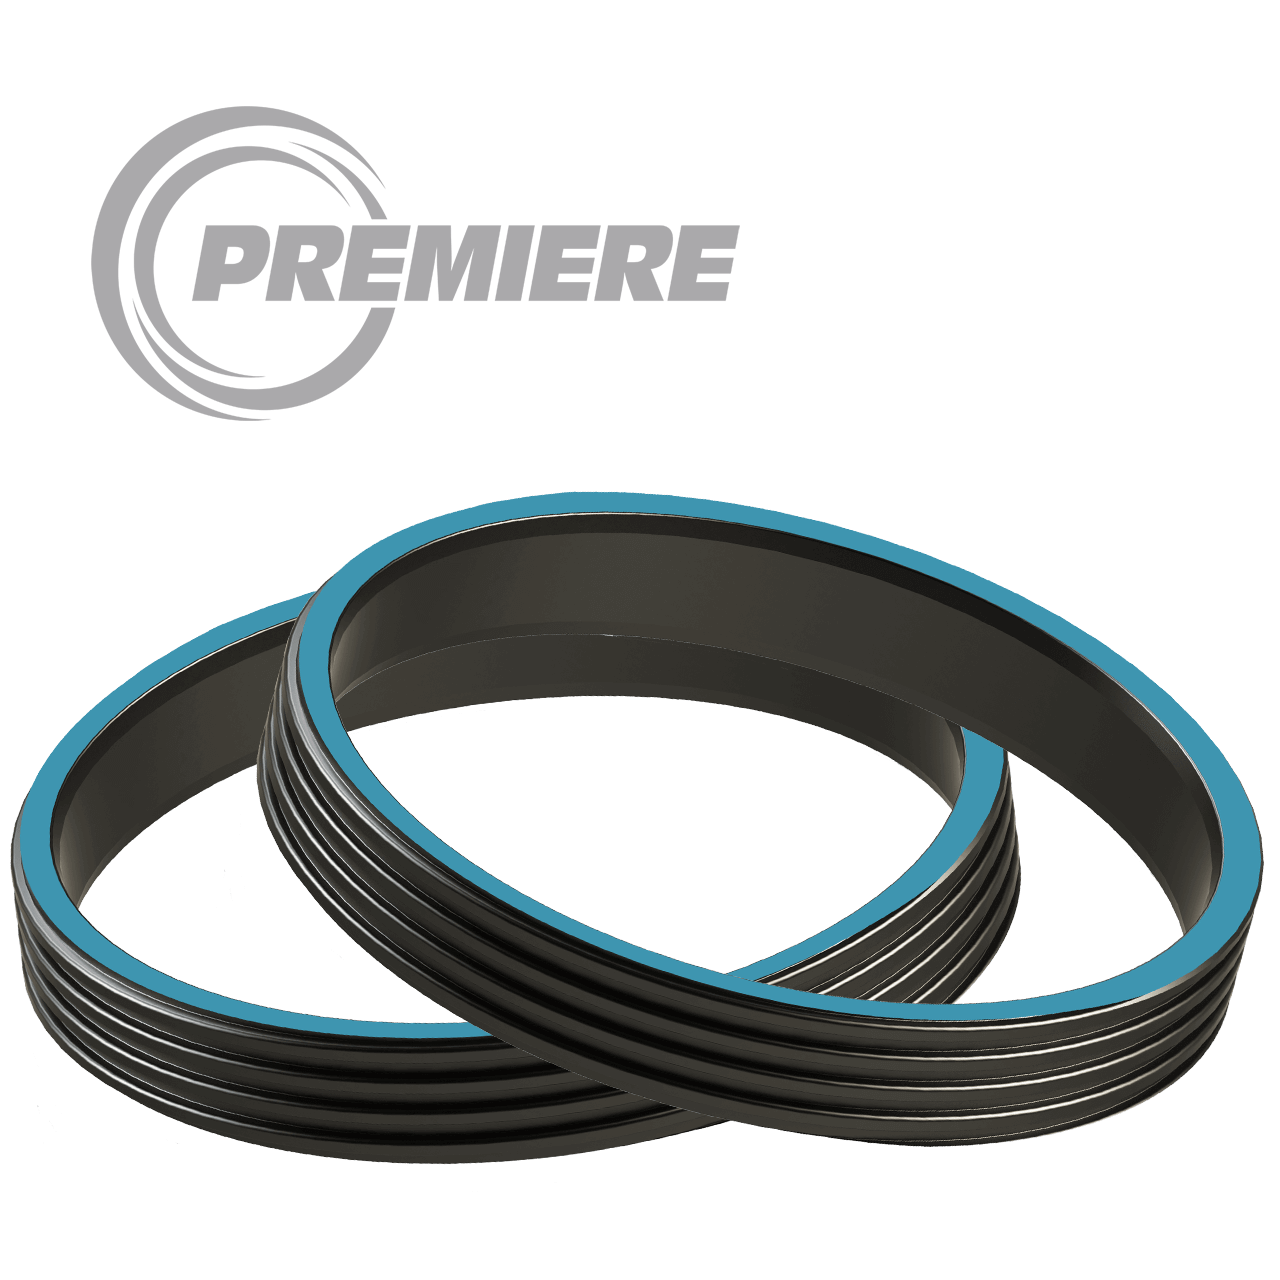 Premiere Inc. Torque Rings can revolutionize the way you run, rotate, and reciprocate API pipe